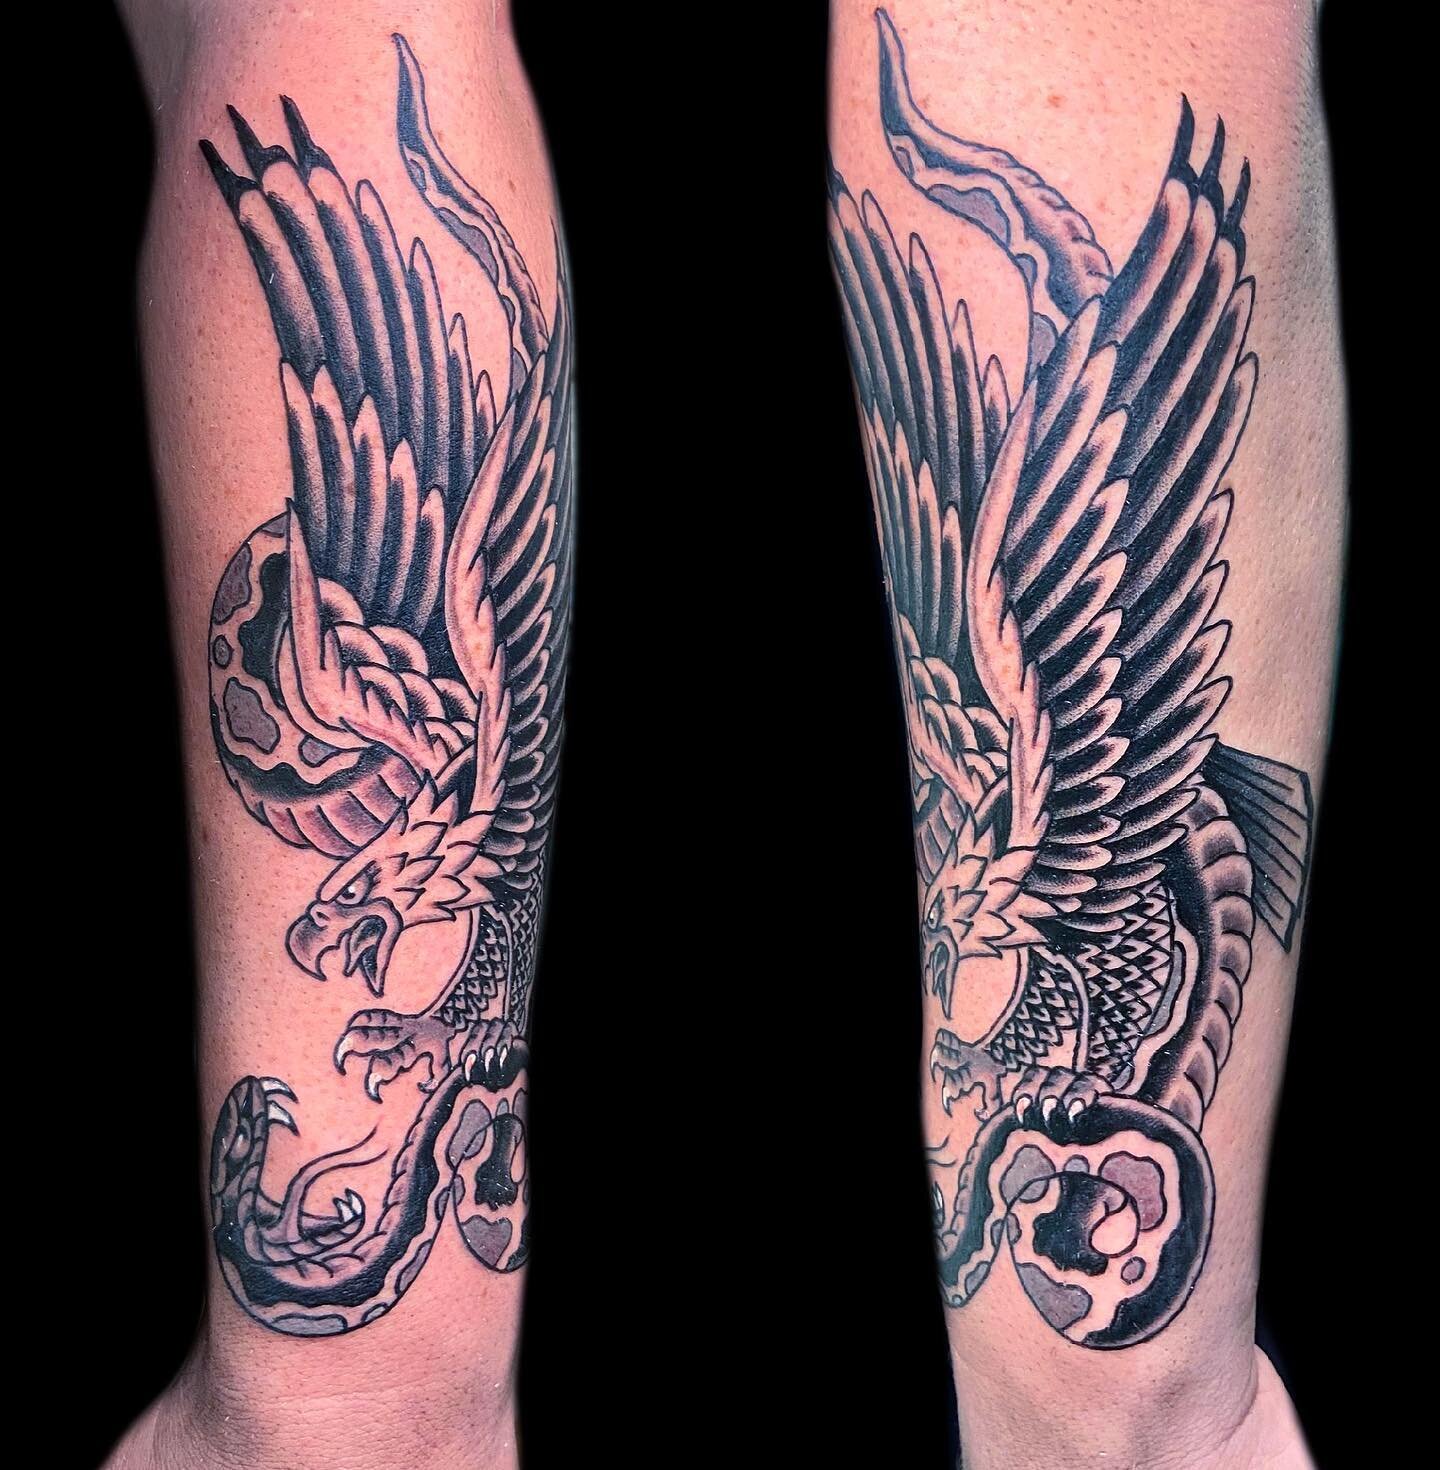 ::NOW BOOKING MAY AND JUNE!:: Snake and eagle battle for Alex. Thanks man! Swipe for vid
.
.
.
.
.
 #houstontattooartist #austintraditionaltattoo #austintattoo #houstontattoos #atx #austintattooartist #austinjapanesetattoo